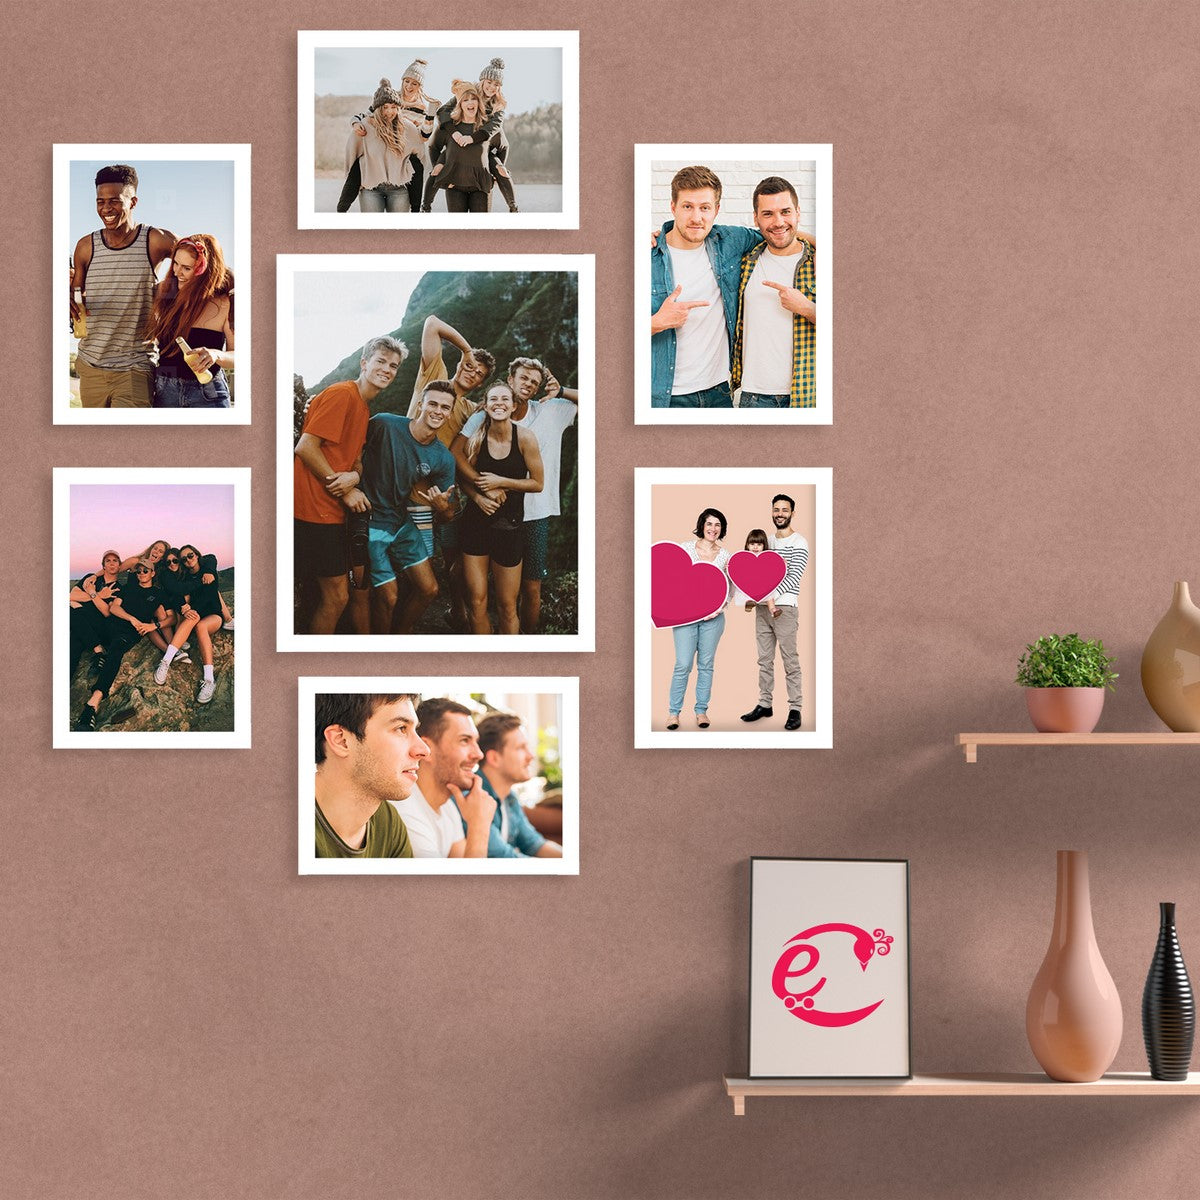 Memory Wall Collage Photo Frame - Set of 7 Photo Frames for 6 Photos of 5"x7", 1 Photos of 8"x10" 1